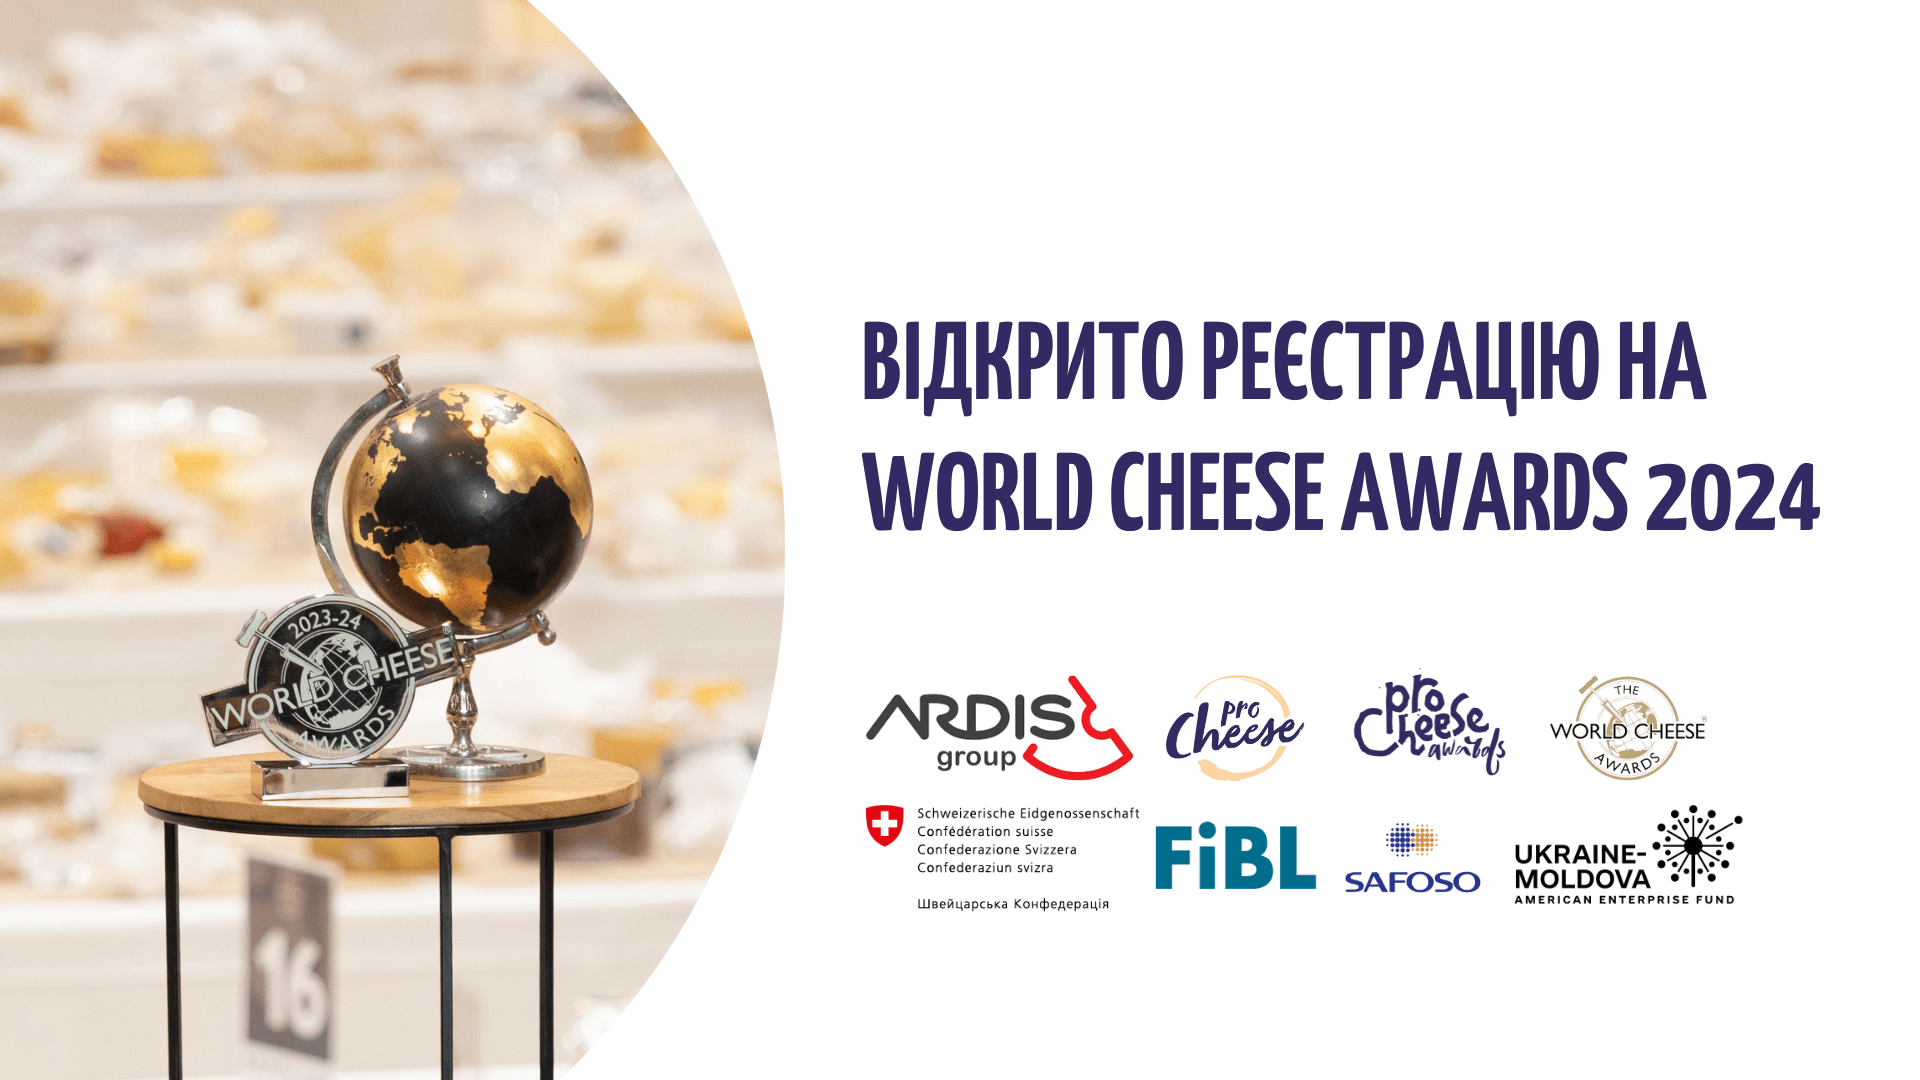 World Cheese Awards 2024: Call for Applications